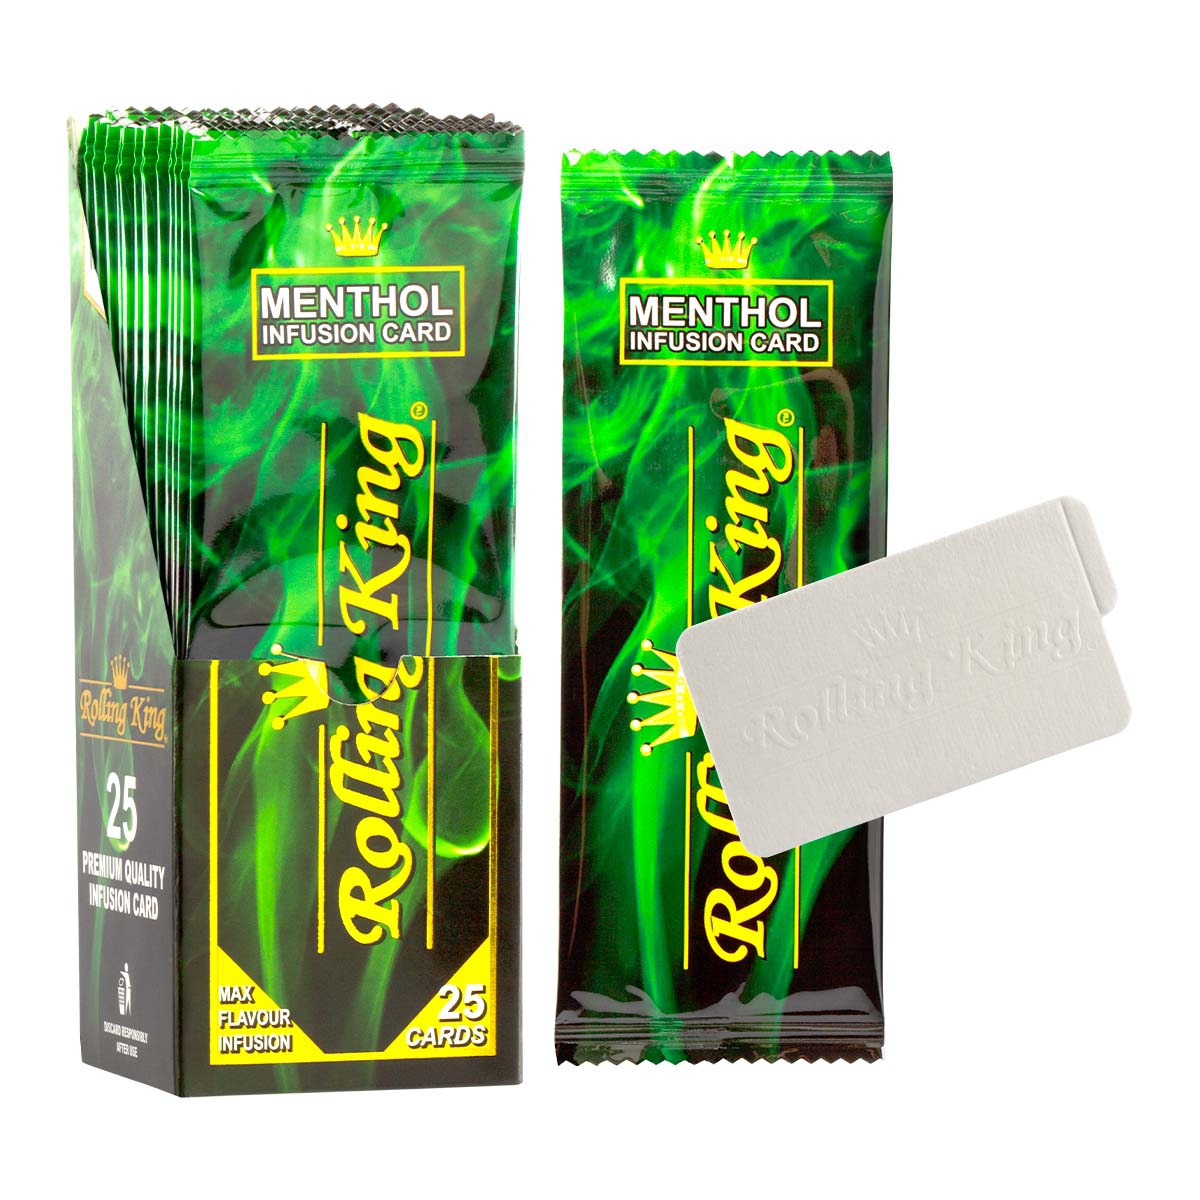 Rolling King, Menthol Infusion Card 25 pcs in display, Incense, Lifestyle, HEADSHOP